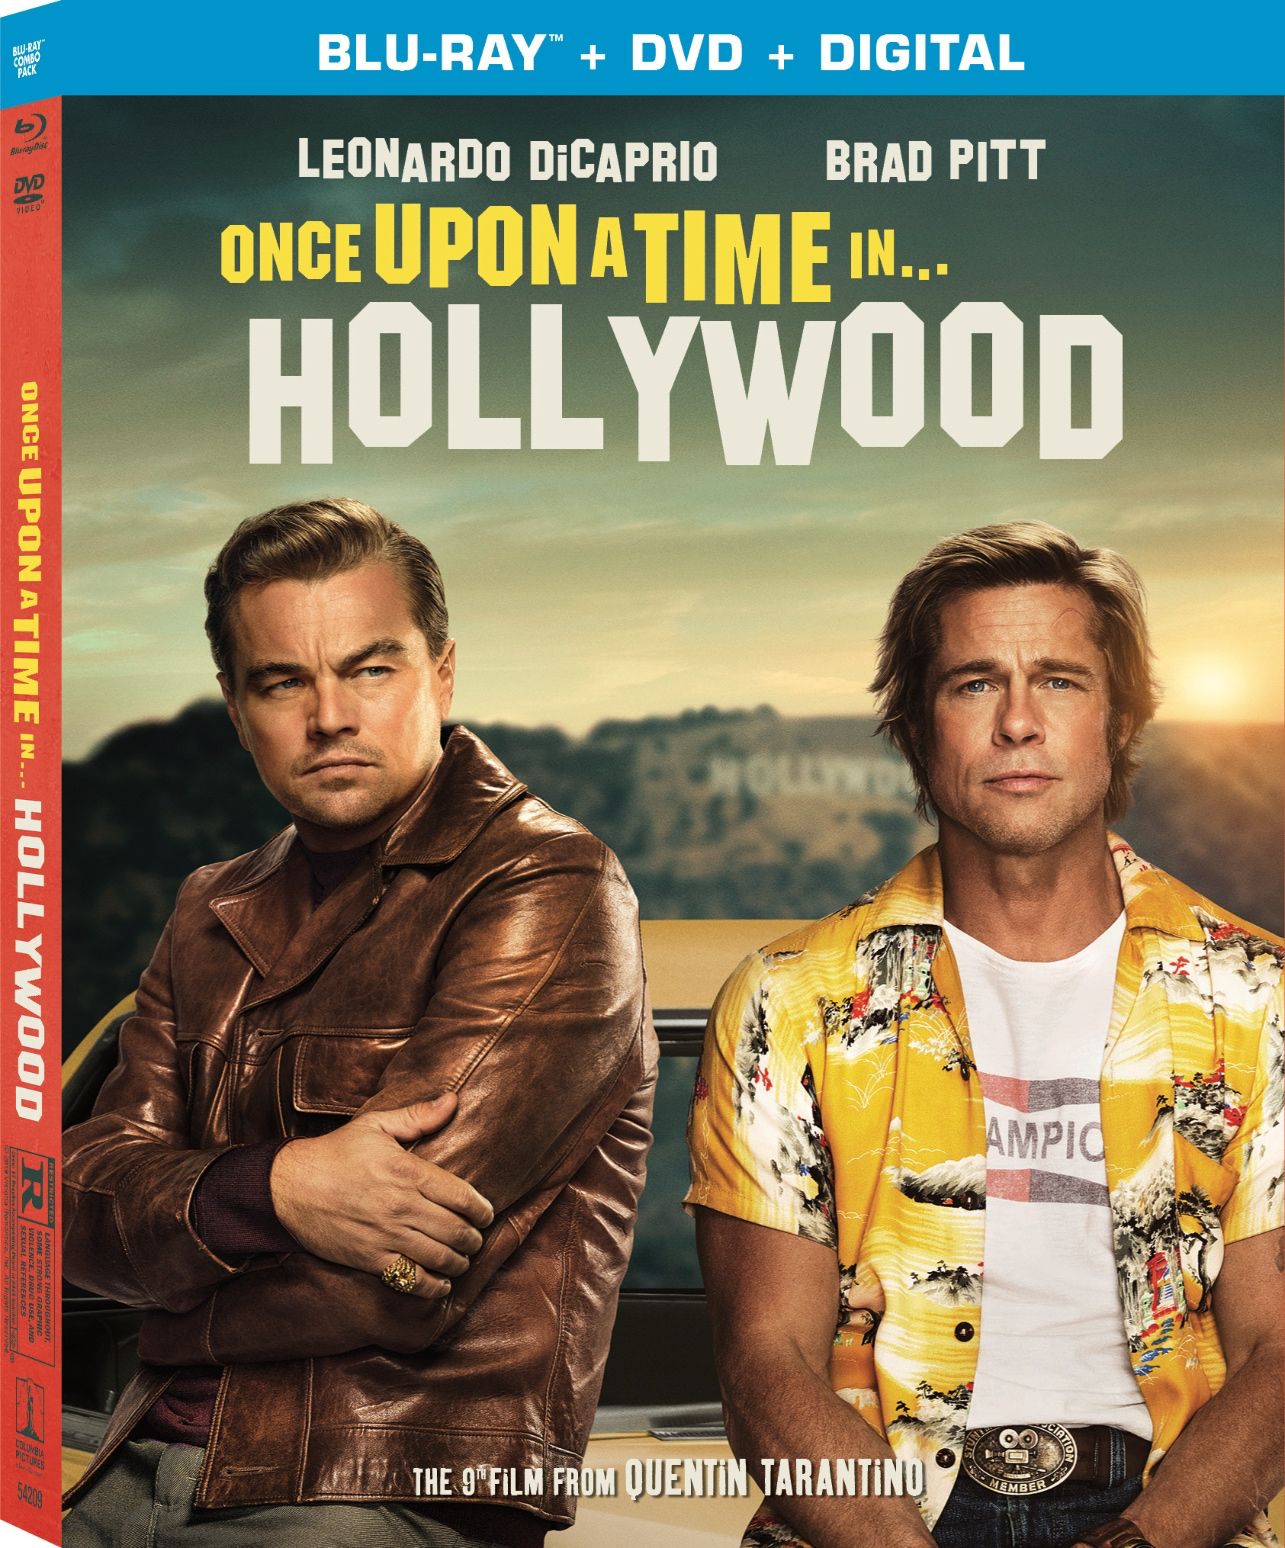 Once Upon a Time in Hollywood Blu-ray cover art